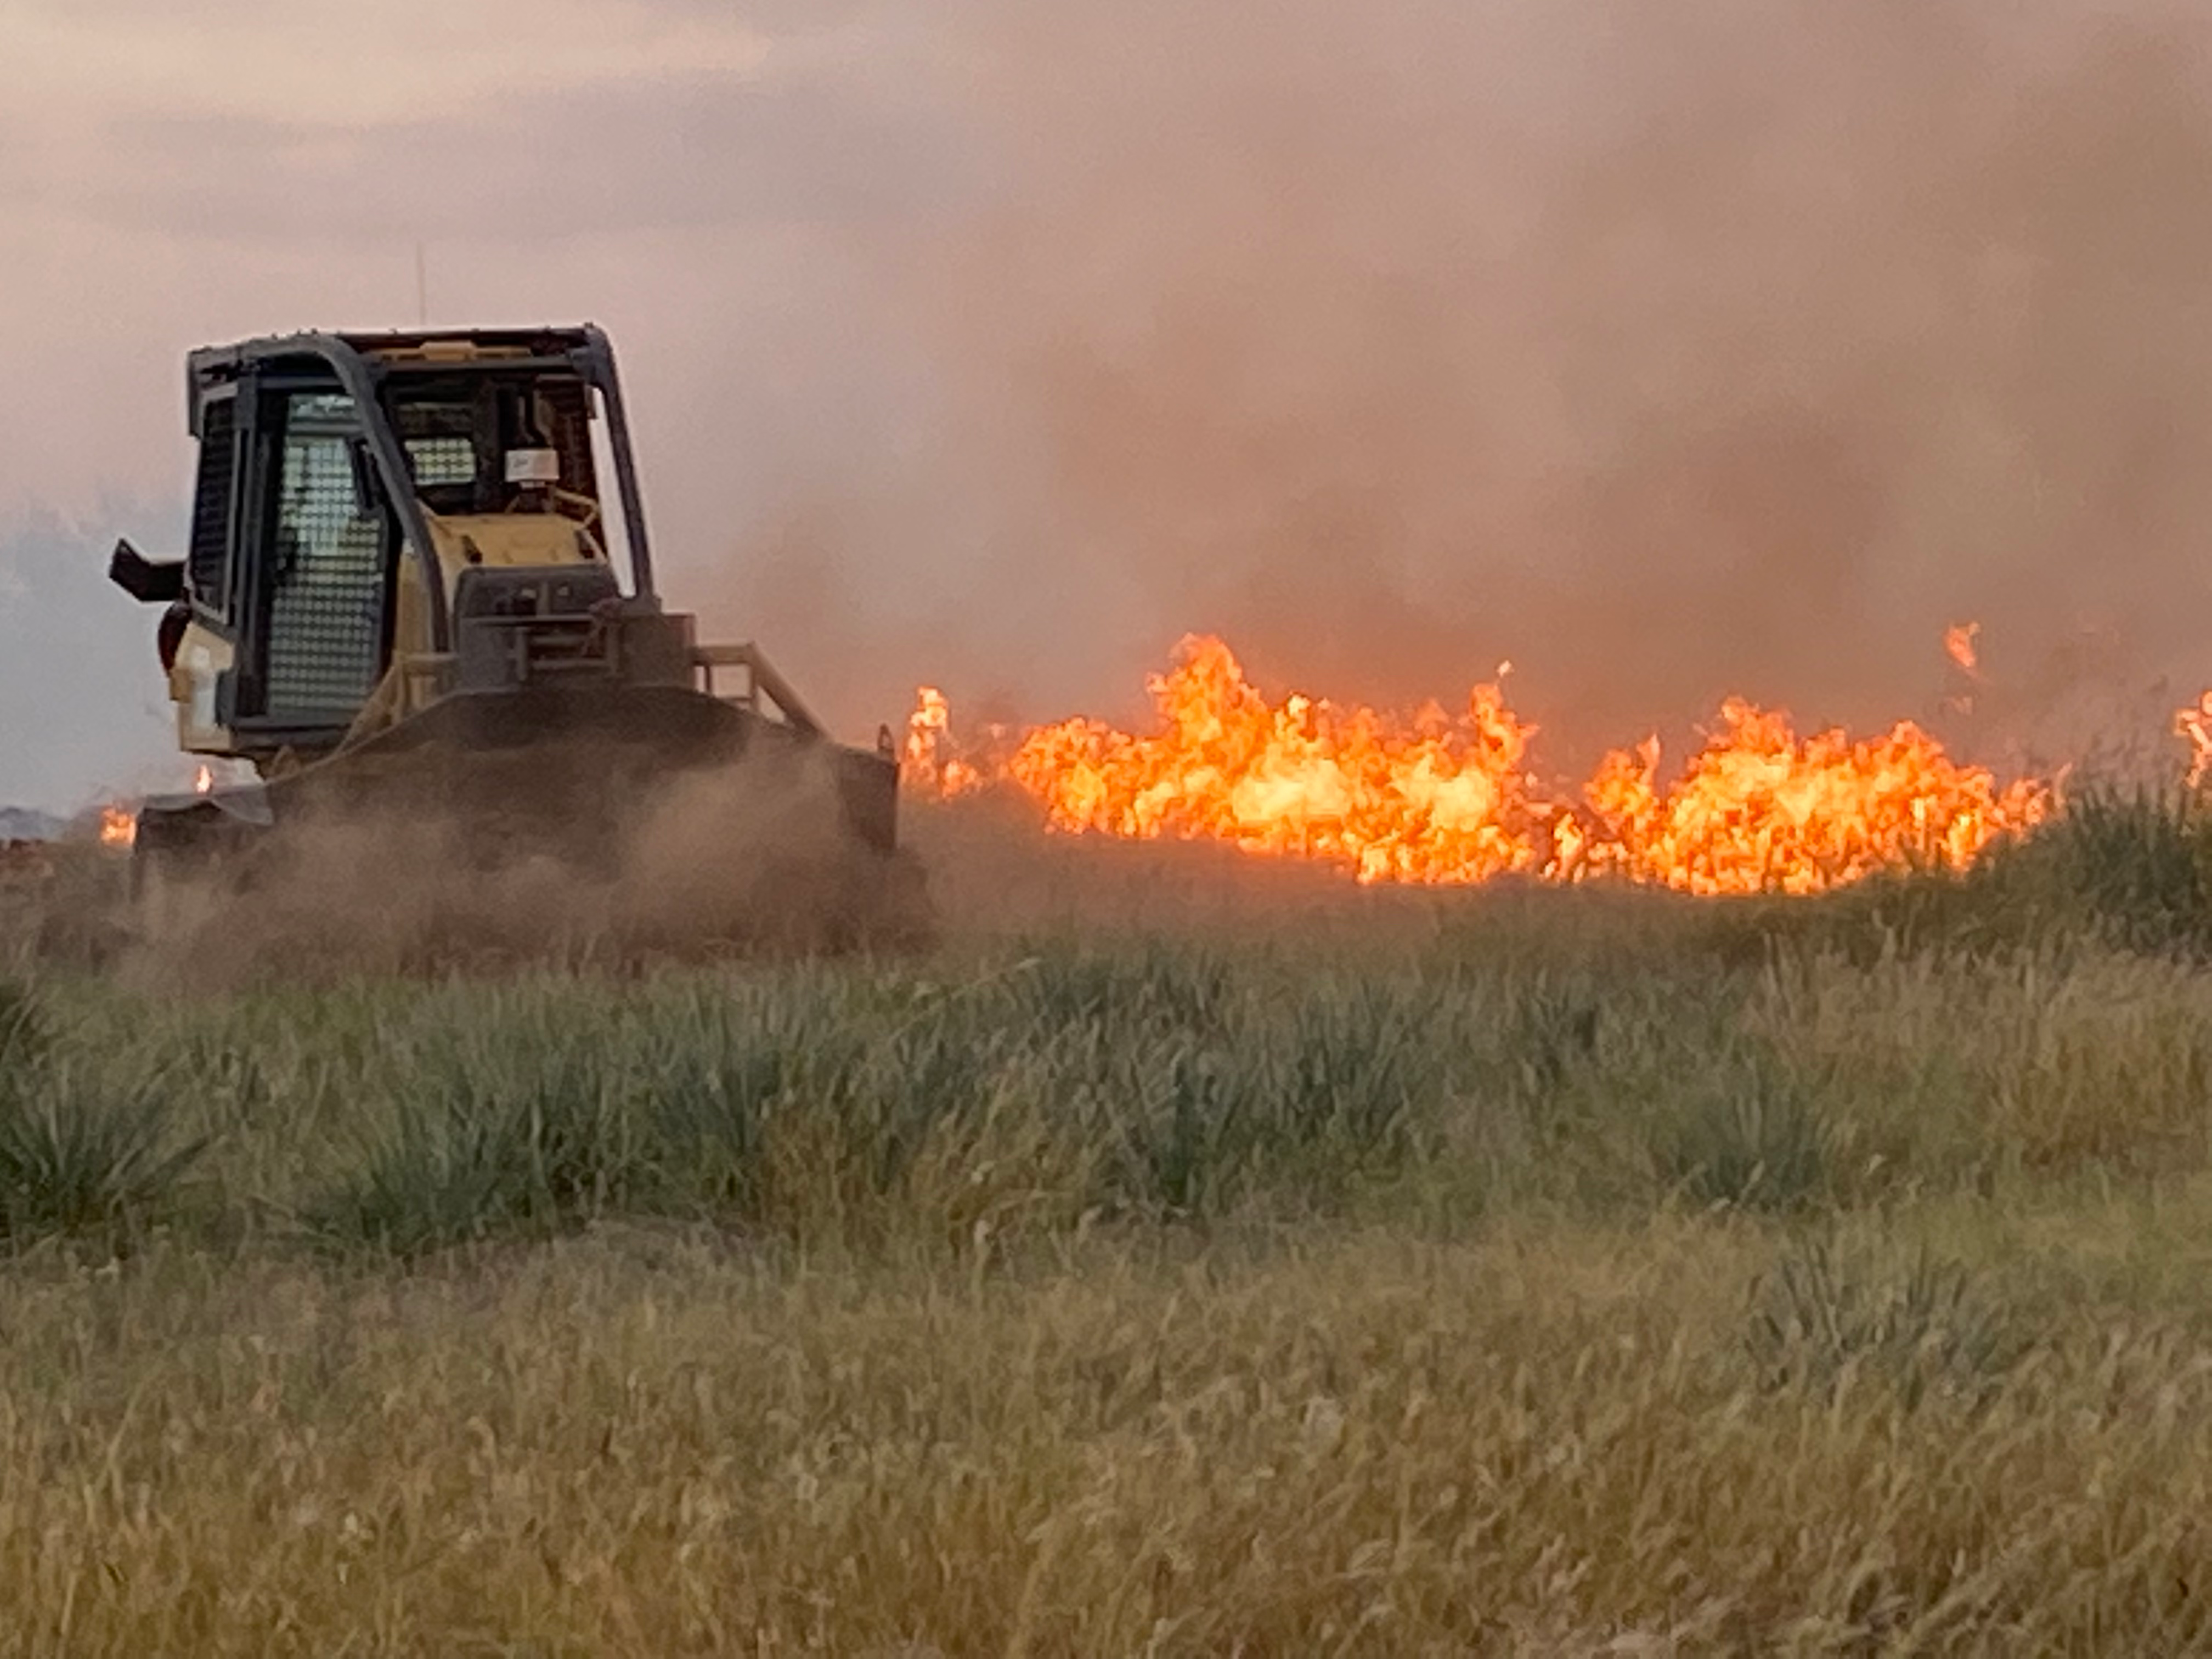 Dozer is seen pushing dirt and creating a fire break from left to right  and visible flames  on the other side of the dozer